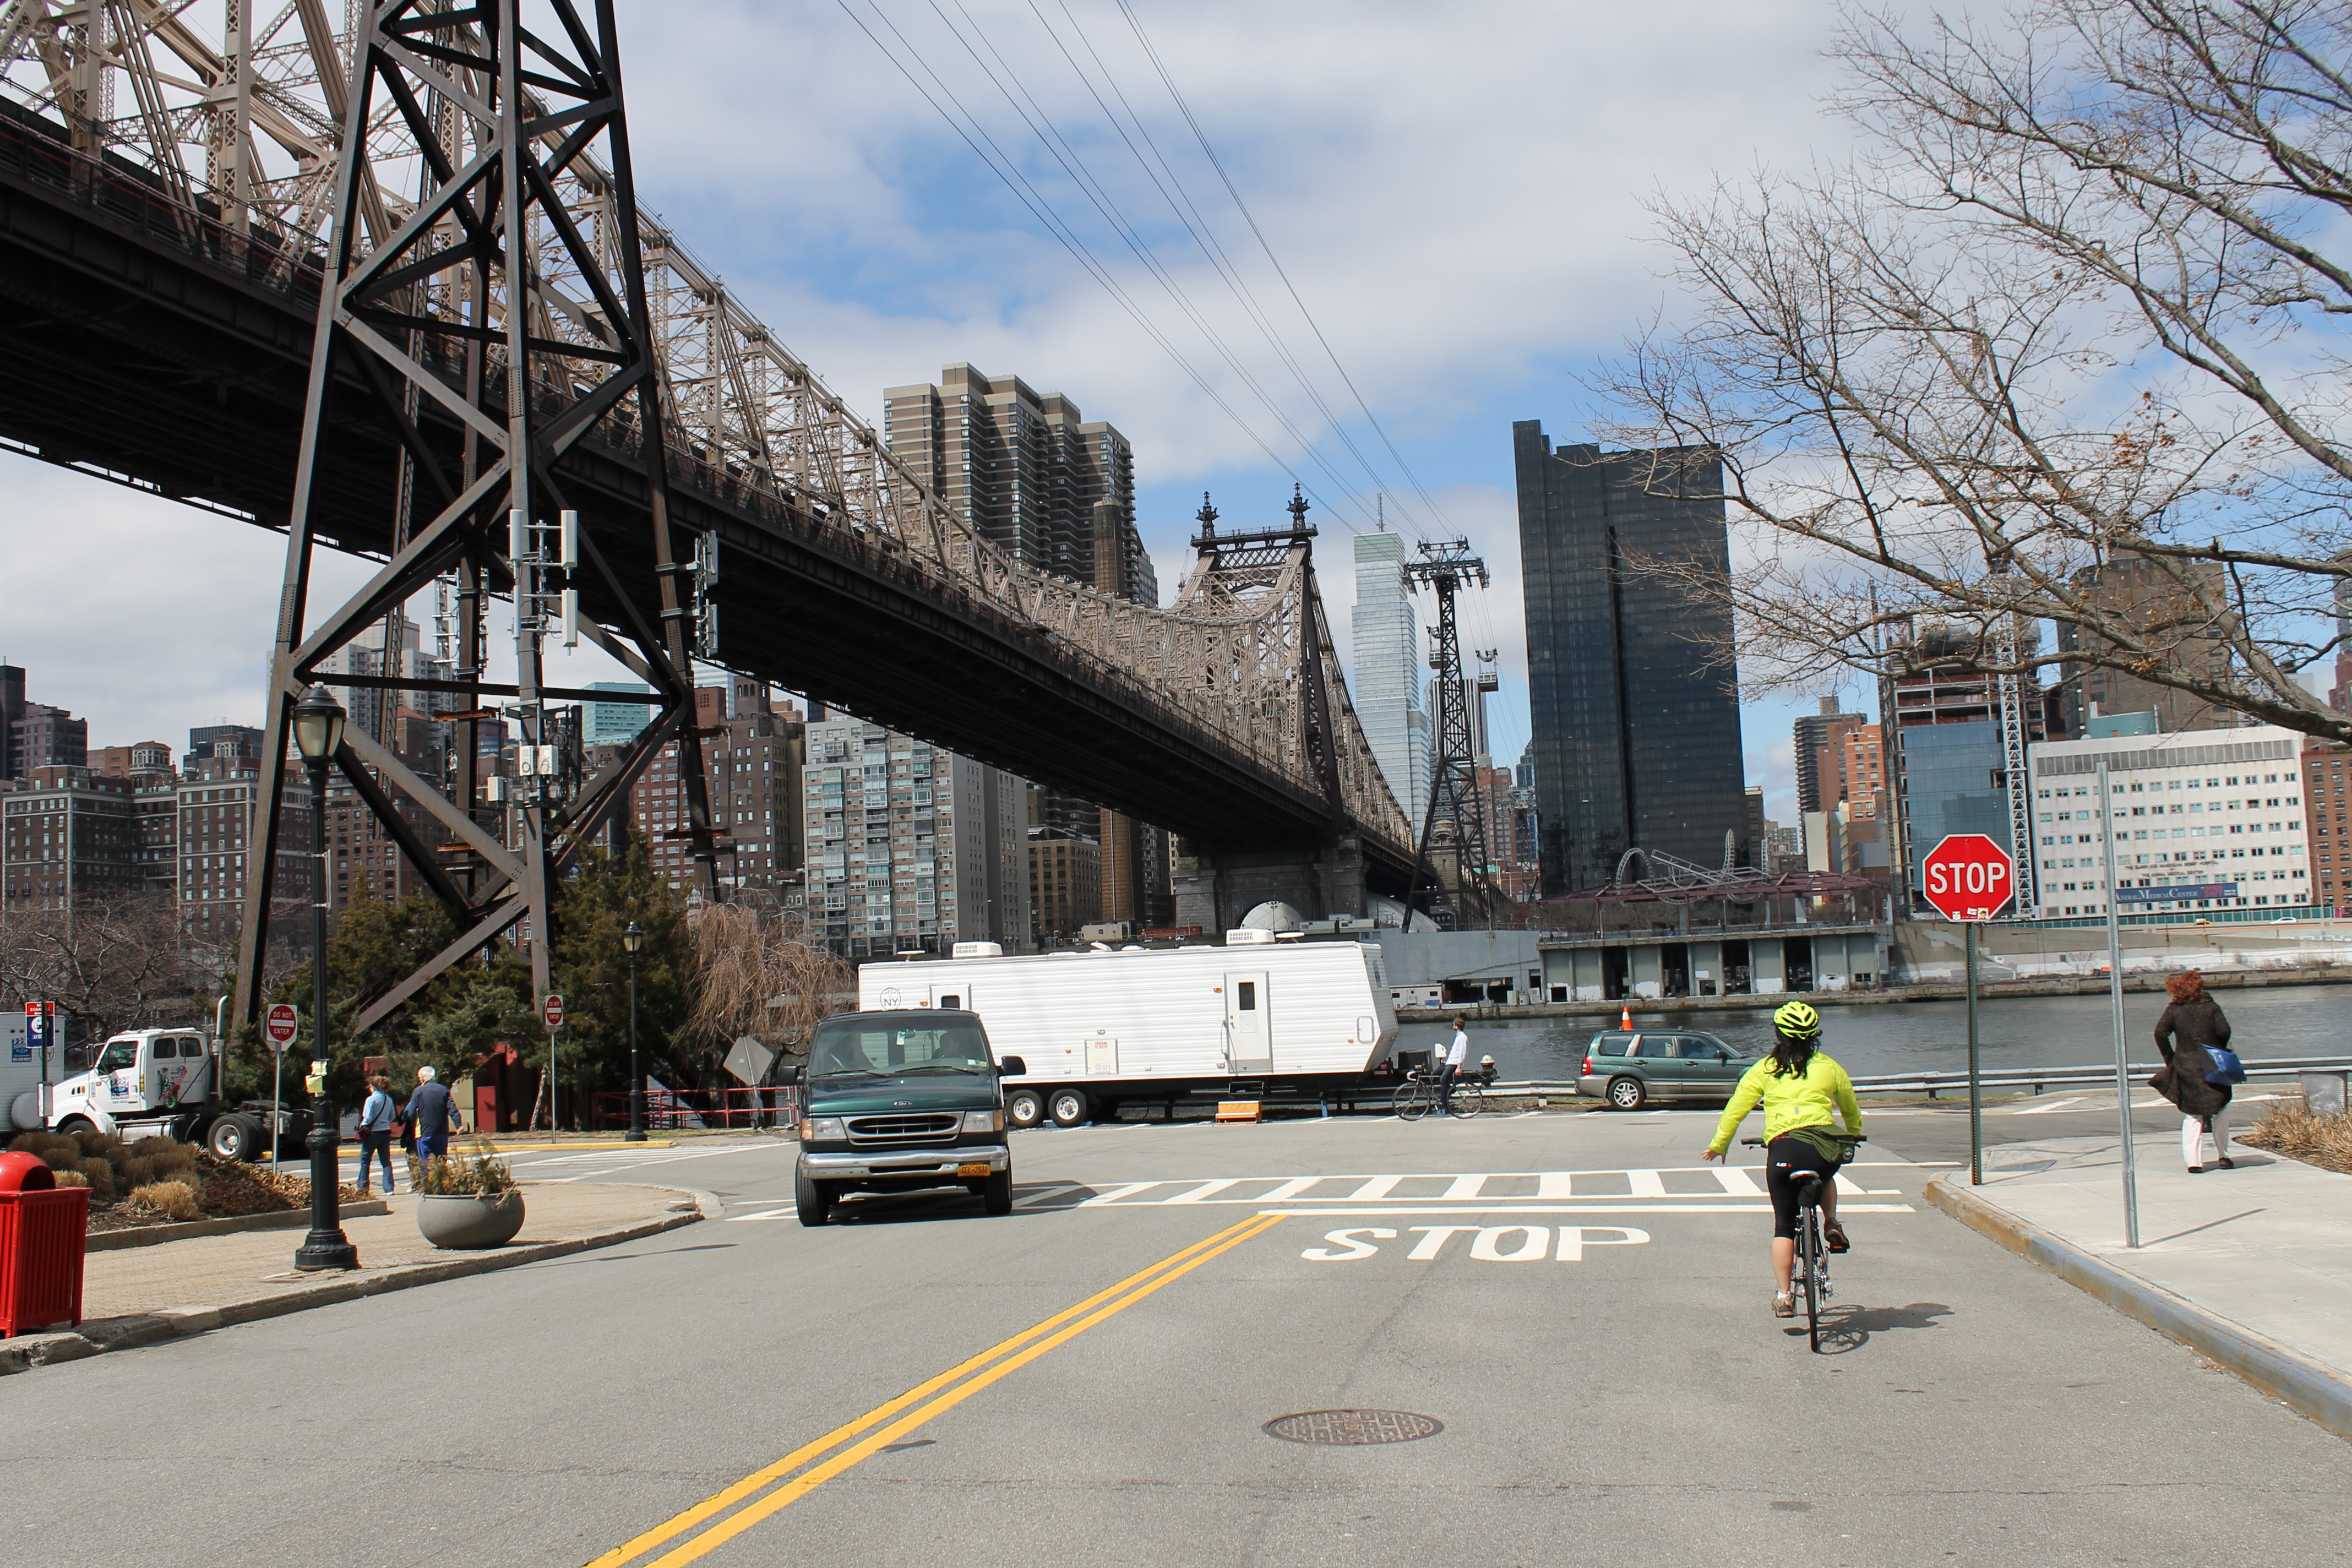 Riding on Roosevelt Island with the Queensboro Bridge looming overheard. Can't wait to cross it on May 4th!